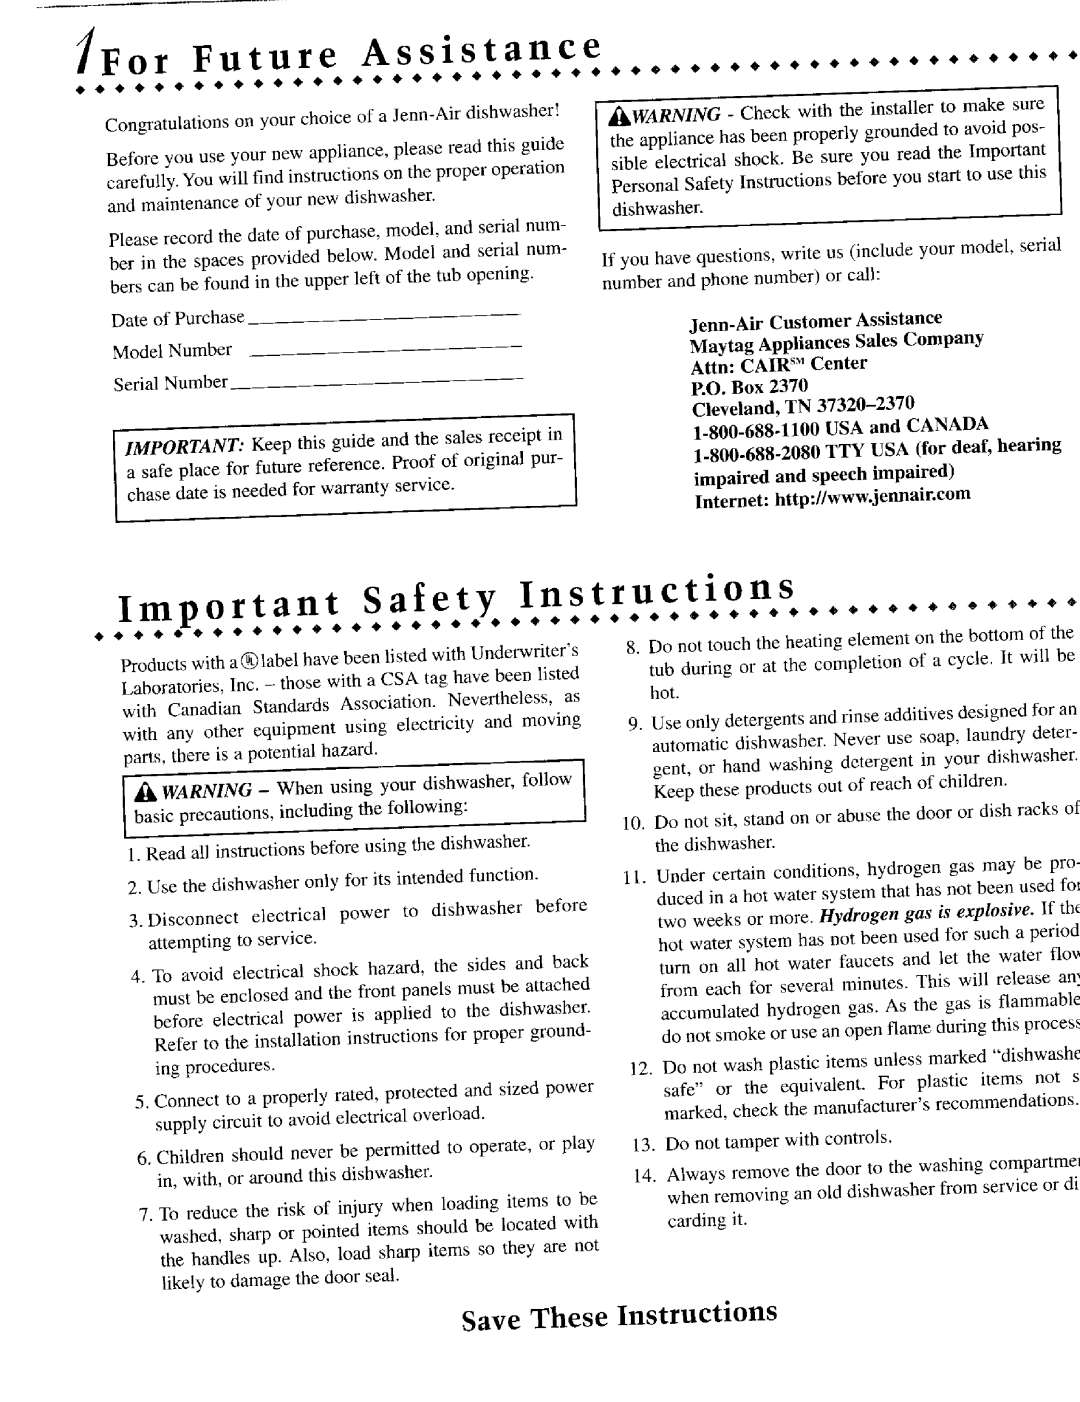 Jenn-Air JDB8910, JDB9910 For Future Assistance, Important Safety Instructions, Save These Instructions, Serial Number 